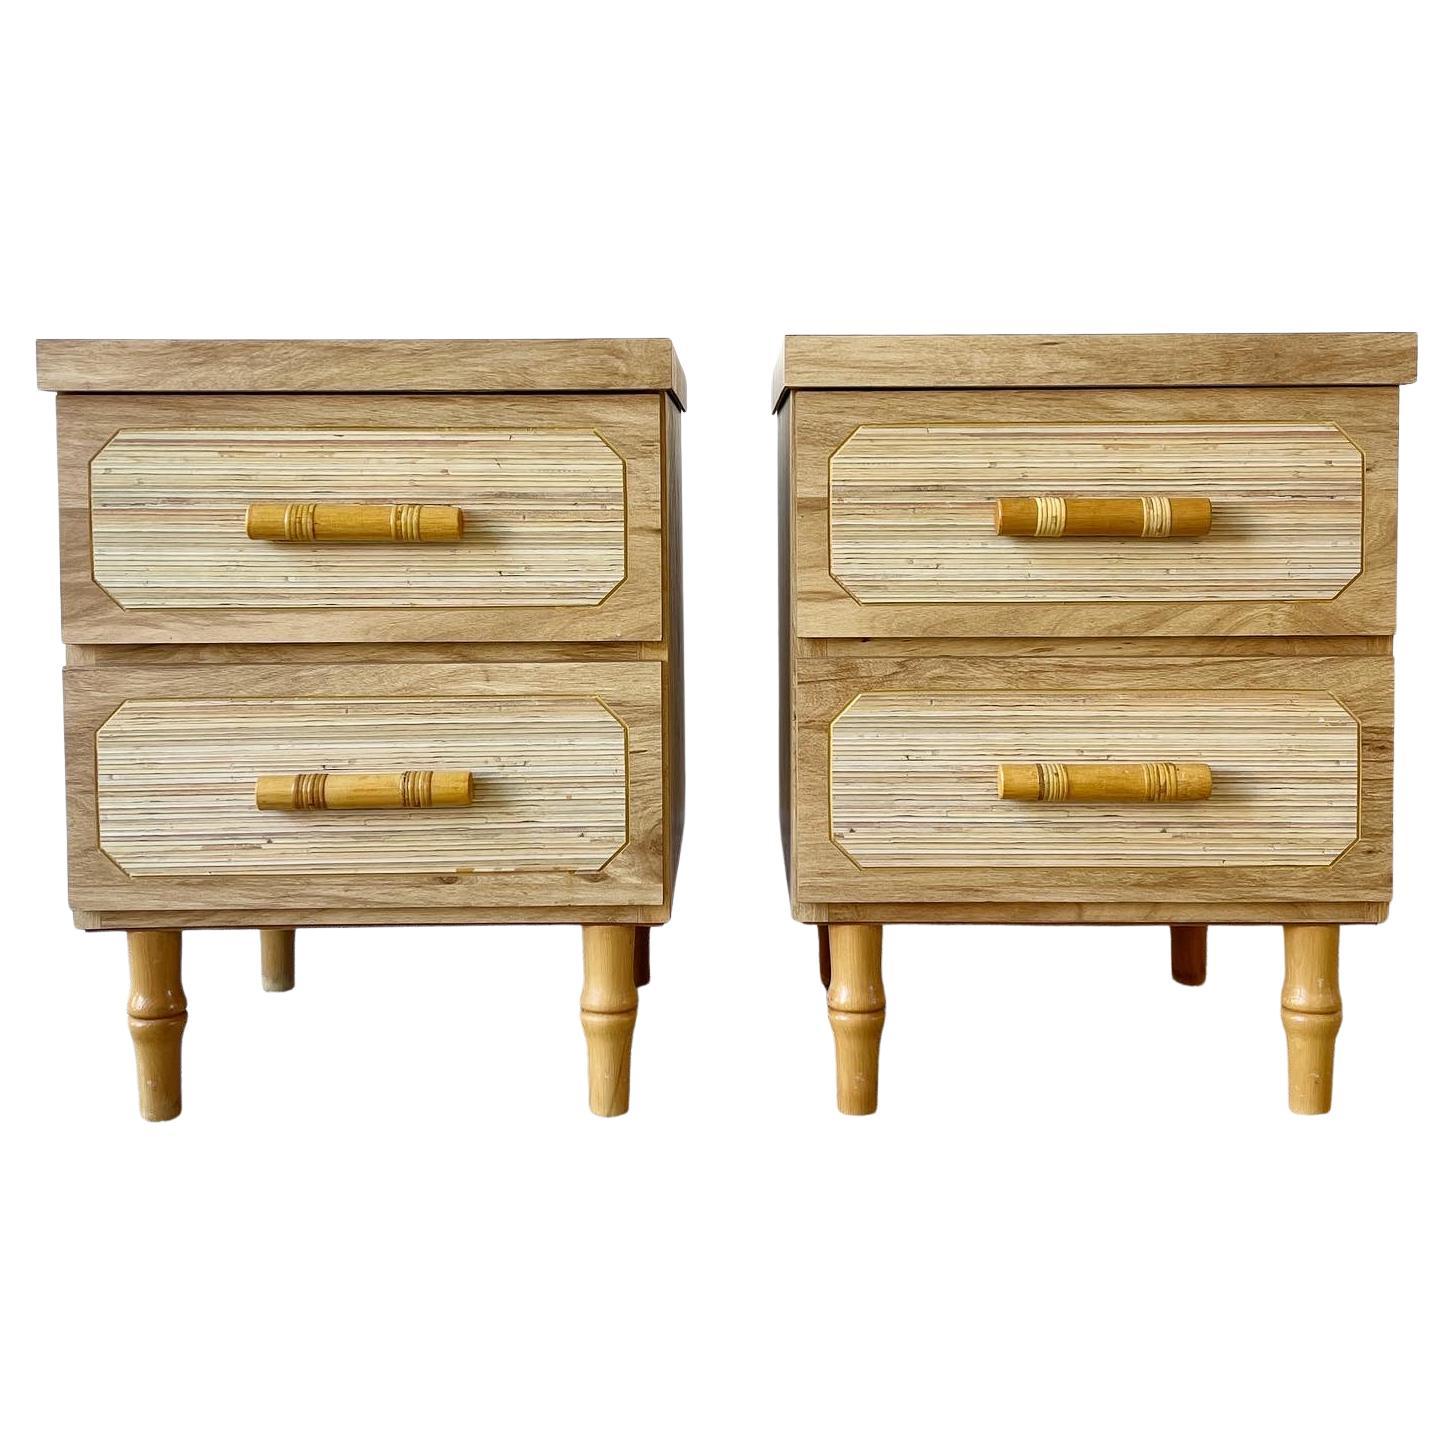 Boho Chic Woodgrain Laminate and Faux Bamboo Nightstands - a Pair